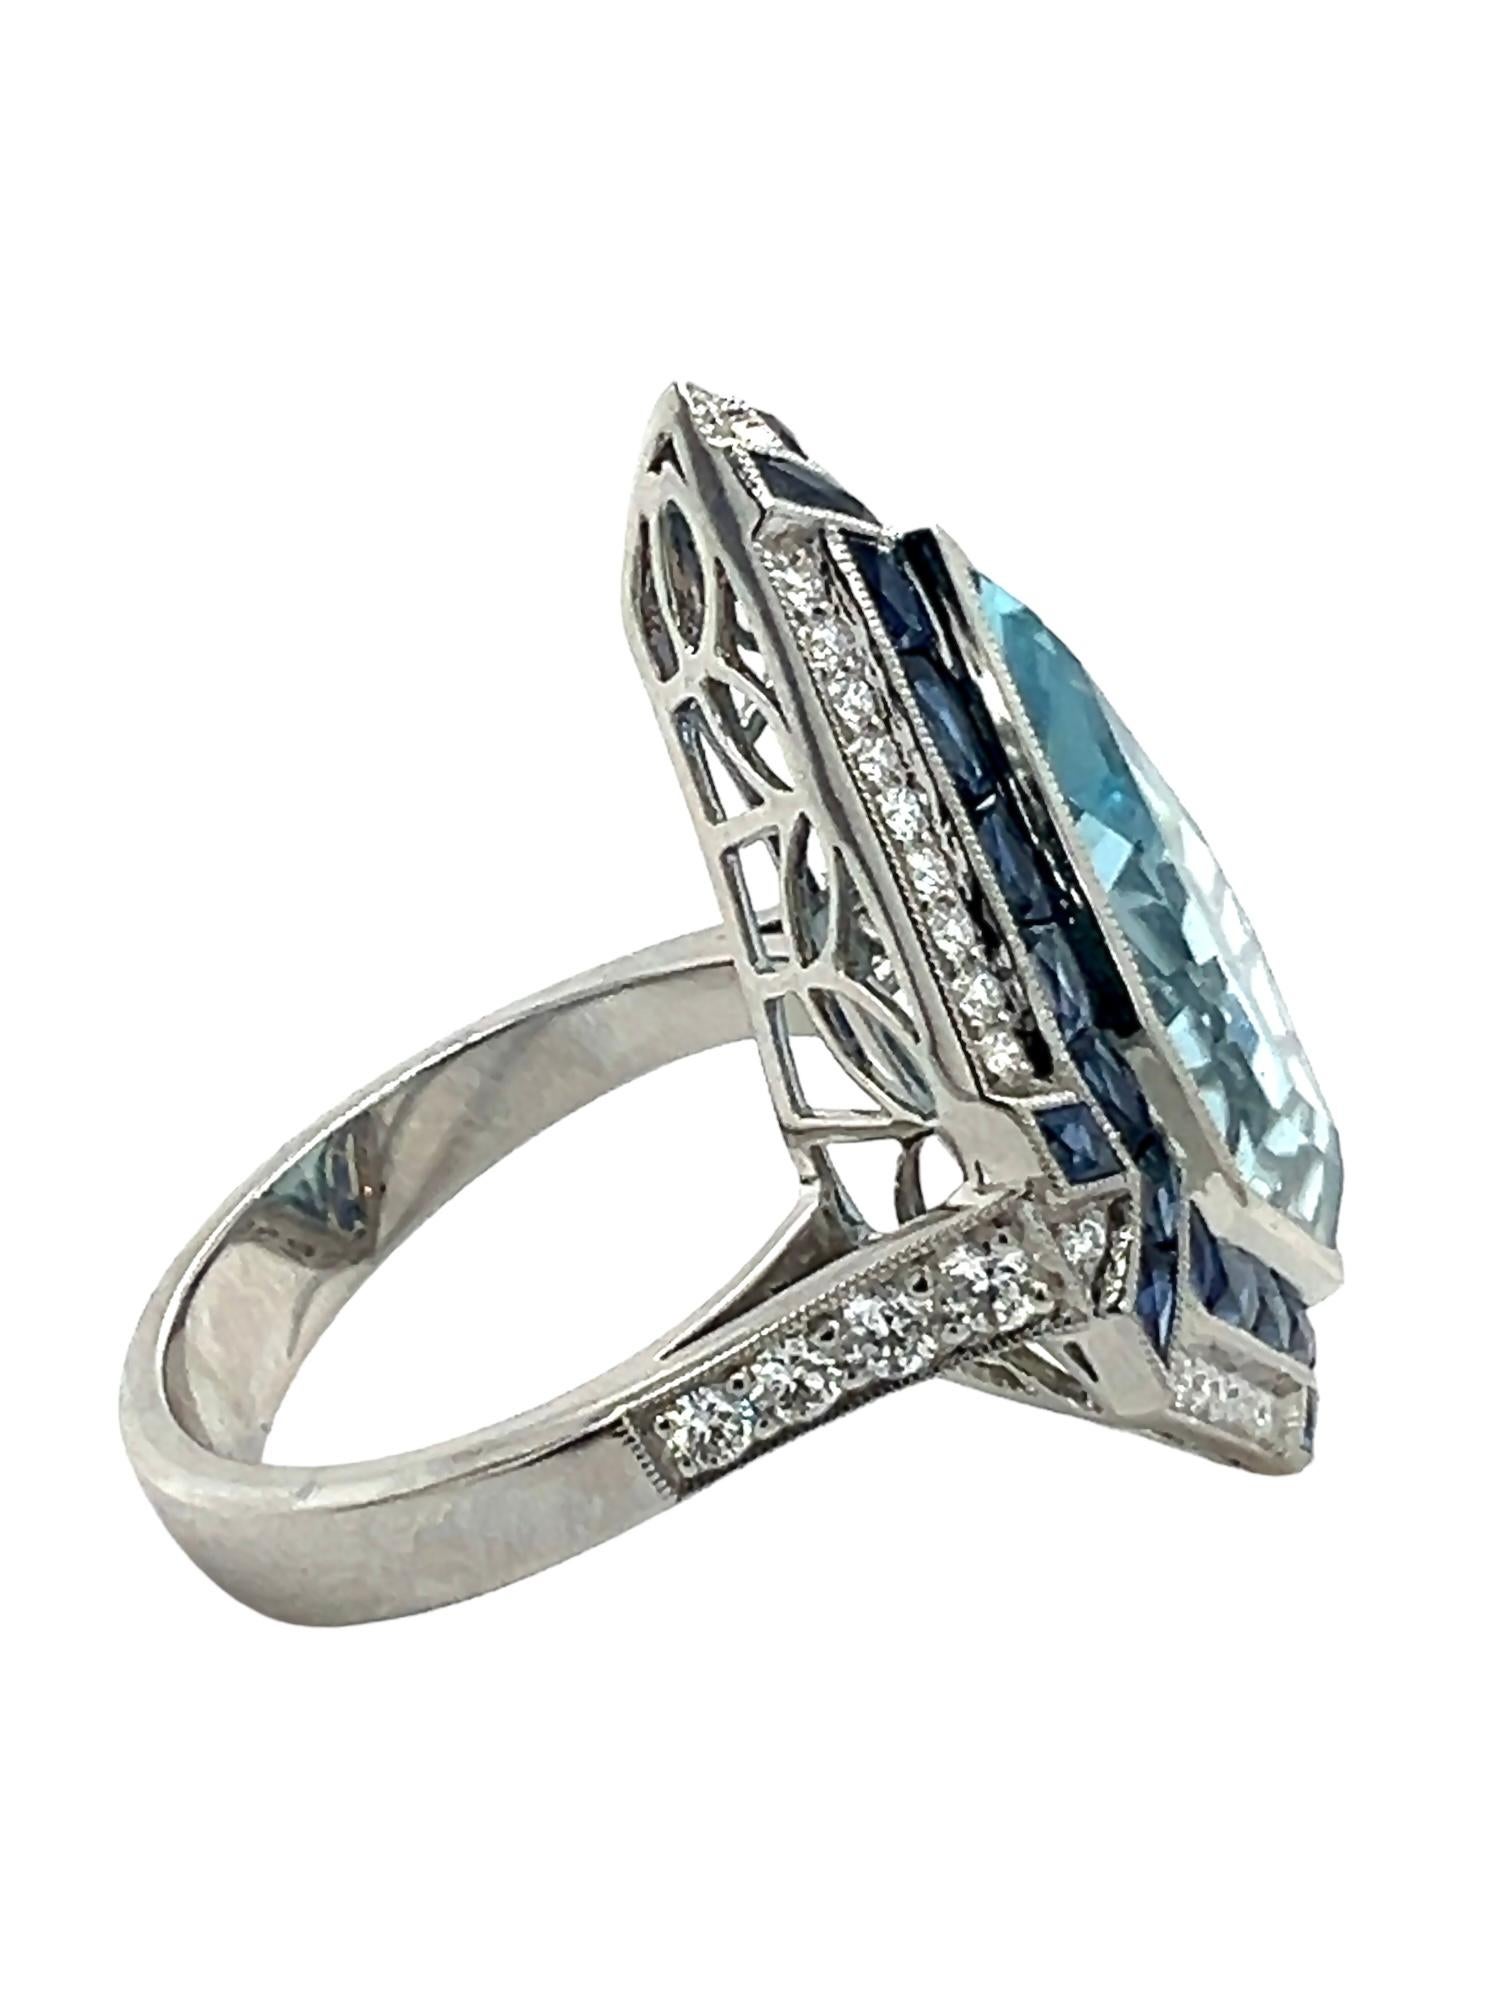 Sophia D. 4.83 Carat Aquamarine Ring In New Condition For Sale In New York, NY